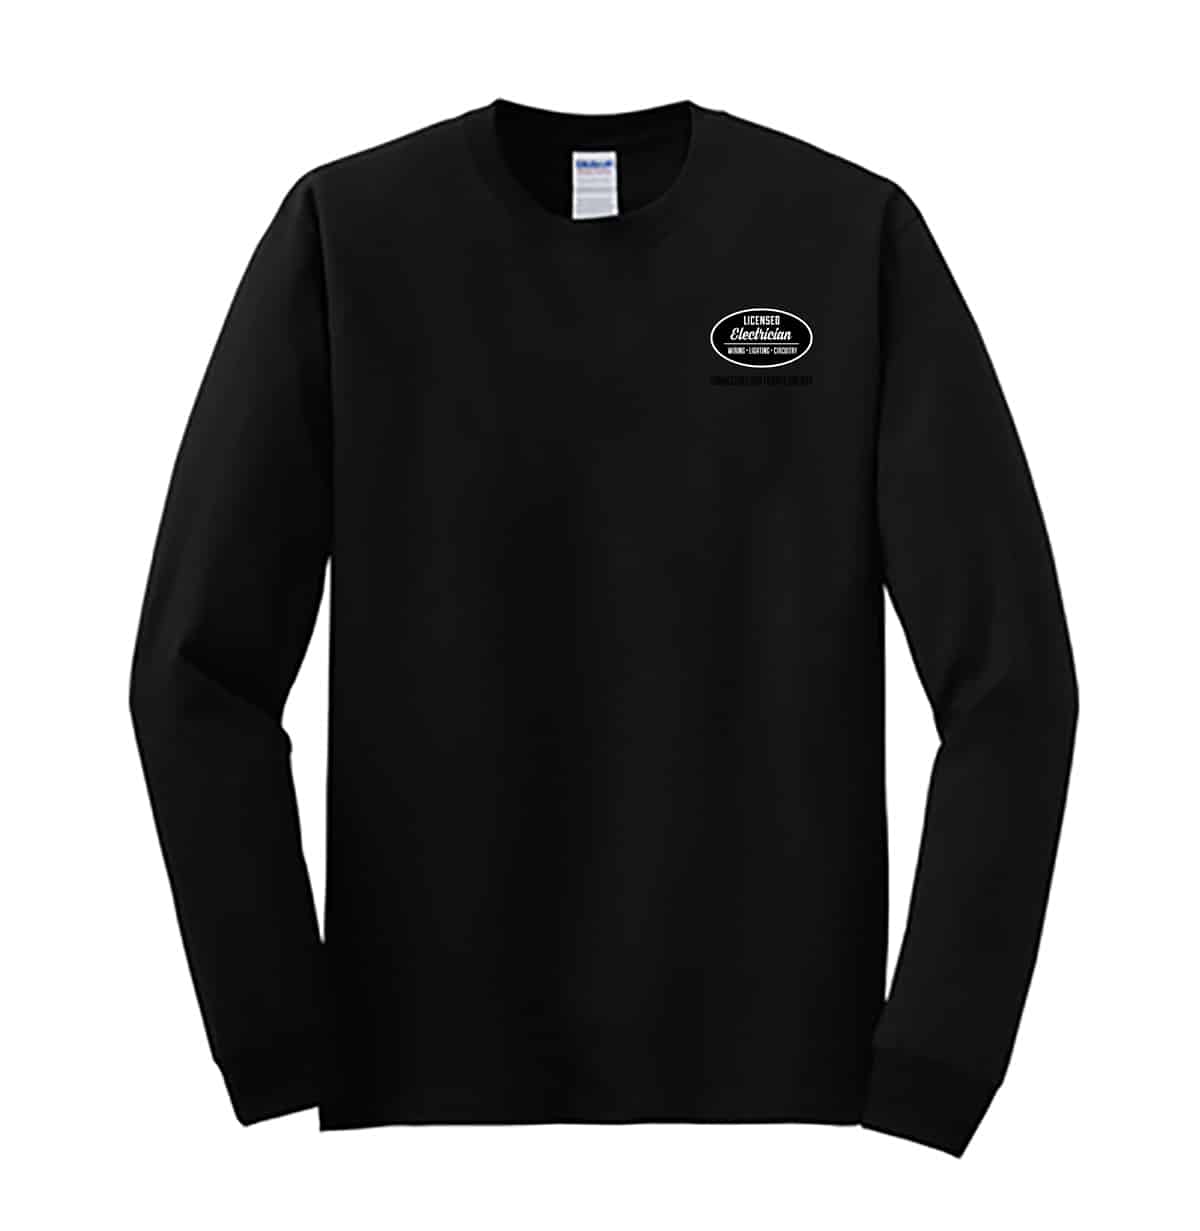 Unisex Licensed Electrician Long Sleeve T-Shirt - PHCEid | PHCEid ...